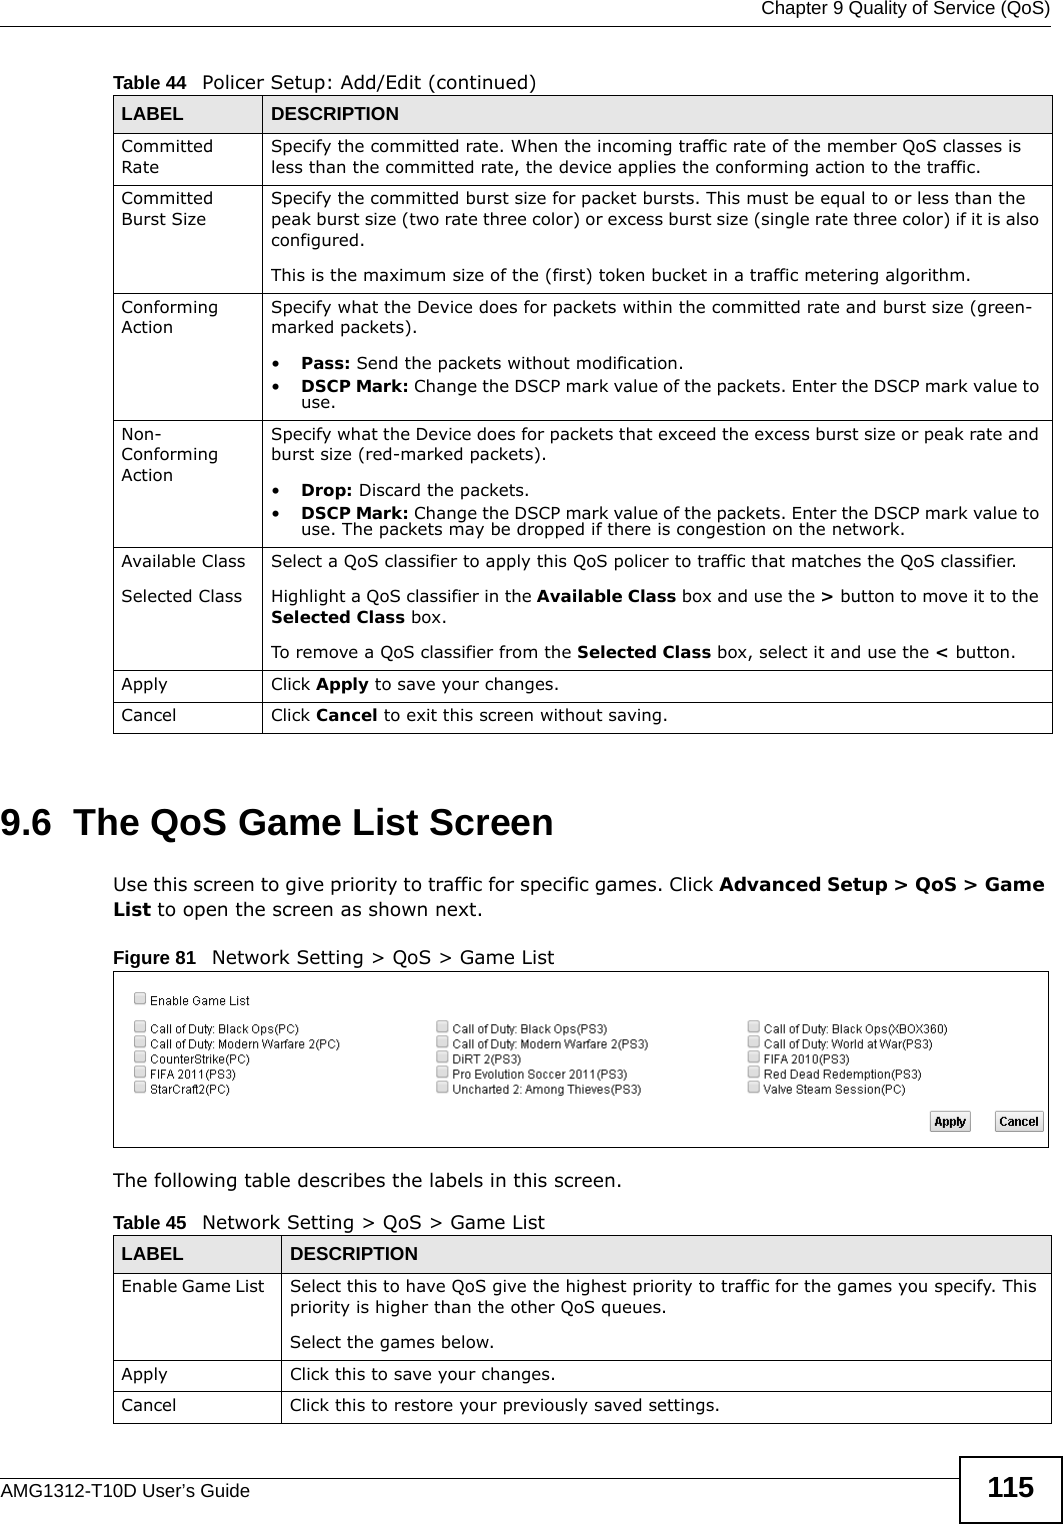  Chapter 9 Quality of Service (QoS)AMG1312-T10D User’s Guide 1159.6  The QoS Game List Screen Use this screen to give priority to traffic for specific games. Click Advanced Setup &gt; QoS &gt; Game List to open the screen as shown next.Figure 81   Network Setting &gt; QoS &gt; Game List The following table describes the labels in this screen.  Committed RateSpecify the committed rate. When the incoming traffic rate of the member QoS classes is less than the committed rate, the device applies the conforming action to the traffic.Committed Burst SizeSpecify the committed burst size for packet bursts. This must be equal to or less than the peak burst size (two rate three color) or excess burst size (single rate three color) if it is also configured.This is the maximum size of the (first) token bucket in a traffic metering algorithm.Conforming ActionSpecify what the Device does for packets within the committed rate and burst size (green-marked packets). •Pass: Send the packets without modification.•DSCP Mark: Change the DSCP mark value of the packets. Enter the DSCP mark value to use. Non-Conforming ActionSpecify what the Device does for packets that exceed the excess burst size or peak rate and burst size (red-marked packets). •Drop: Discard the packets.•DSCP Mark: Change the DSCP mark value of the packets. Enter the DSCP mark value to use. The packets may be dropped if there is congestion on the network.Available ClassSelected Class Select a QoS classifier to apply this QoS policer to traffic that matches the QoS classifier.Highlight a QoS classifier in the Available Class box and use the &gt; button to move it to the Selected Class box.To remove a QoS classifier from the Selected Class box, select it and use the &lt; button.Apply Click Apply to save your changes.Cancel Click Cancel to exit this screen without saving.Table 44   Policer Setup: Add/Edit (continued)LABEL DESCRIPTIONTable 45   Network Setting &gt; QoS &gt; Game ListLABEL DESCRIPTIONEnable Game List   Select this to have QoS give the highest priority to traffic for the games you specify. This priority is higher than the other QoS queues.Select the games below.Apply Click this to save your changes.Cancel Click this to restore your previously saved settings.